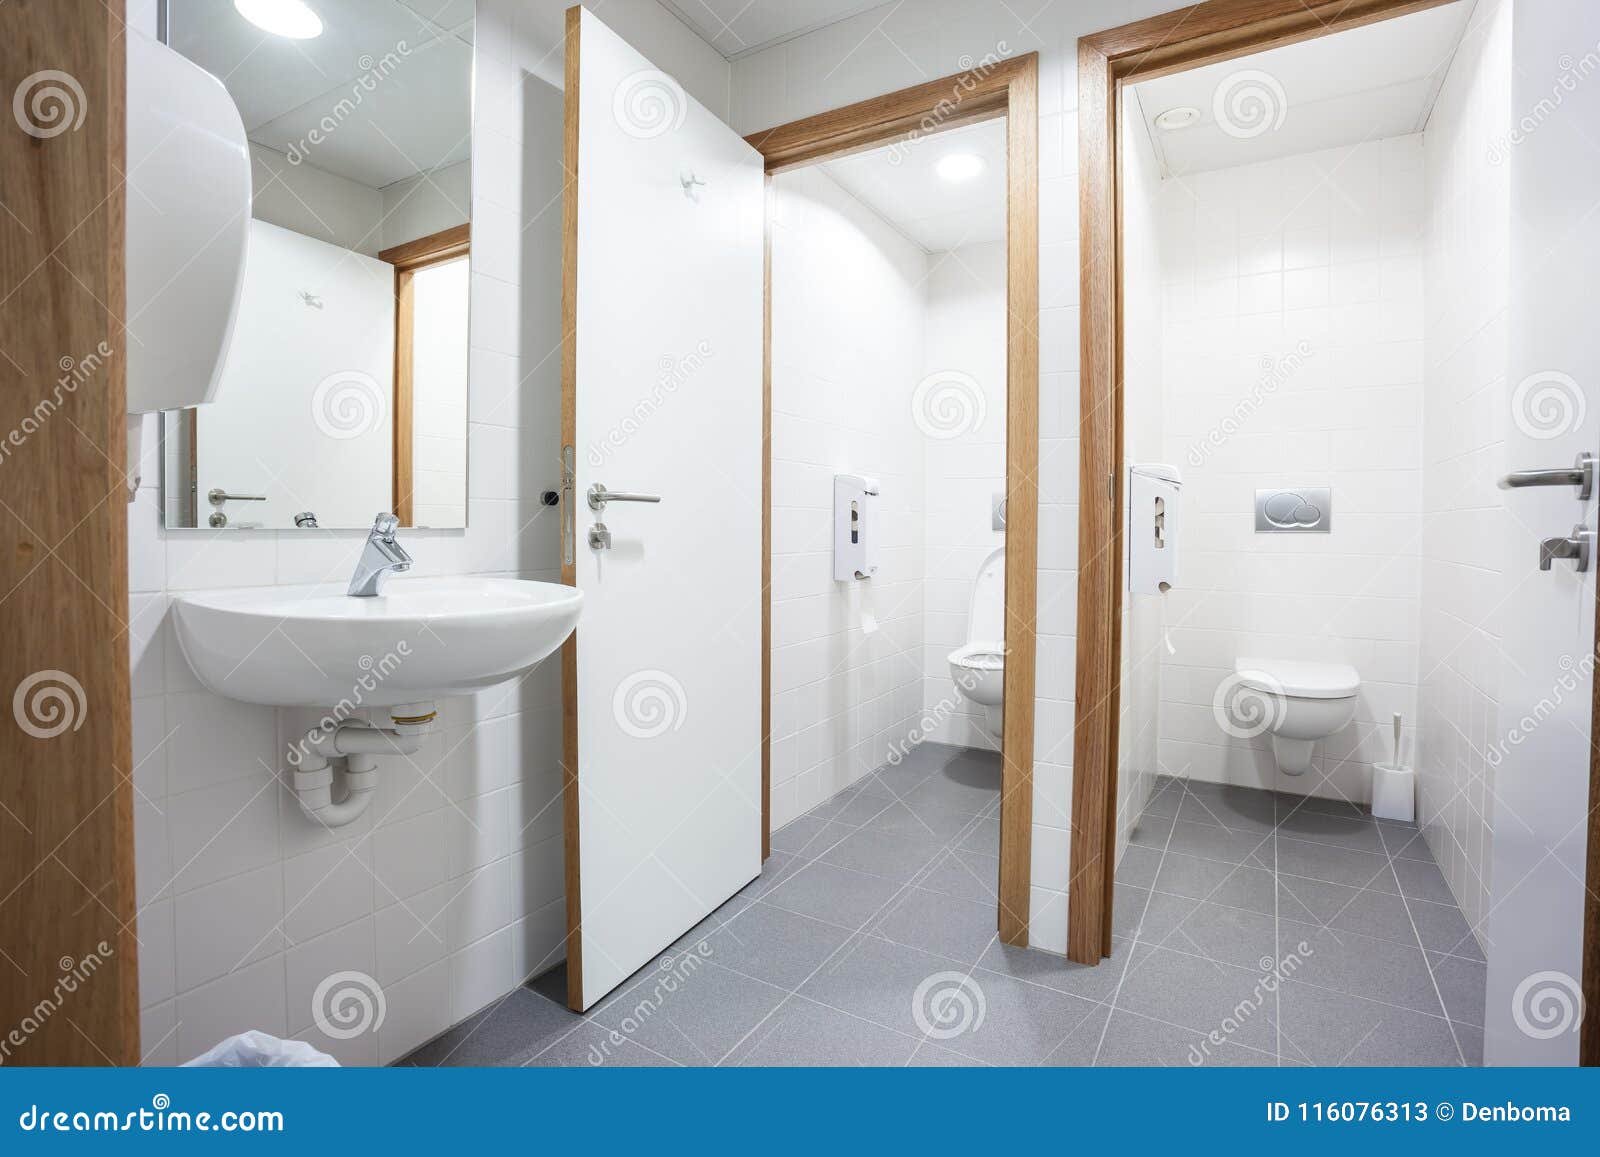 Doors From Toilets And Sinks Stock Image Image Of Bathroom